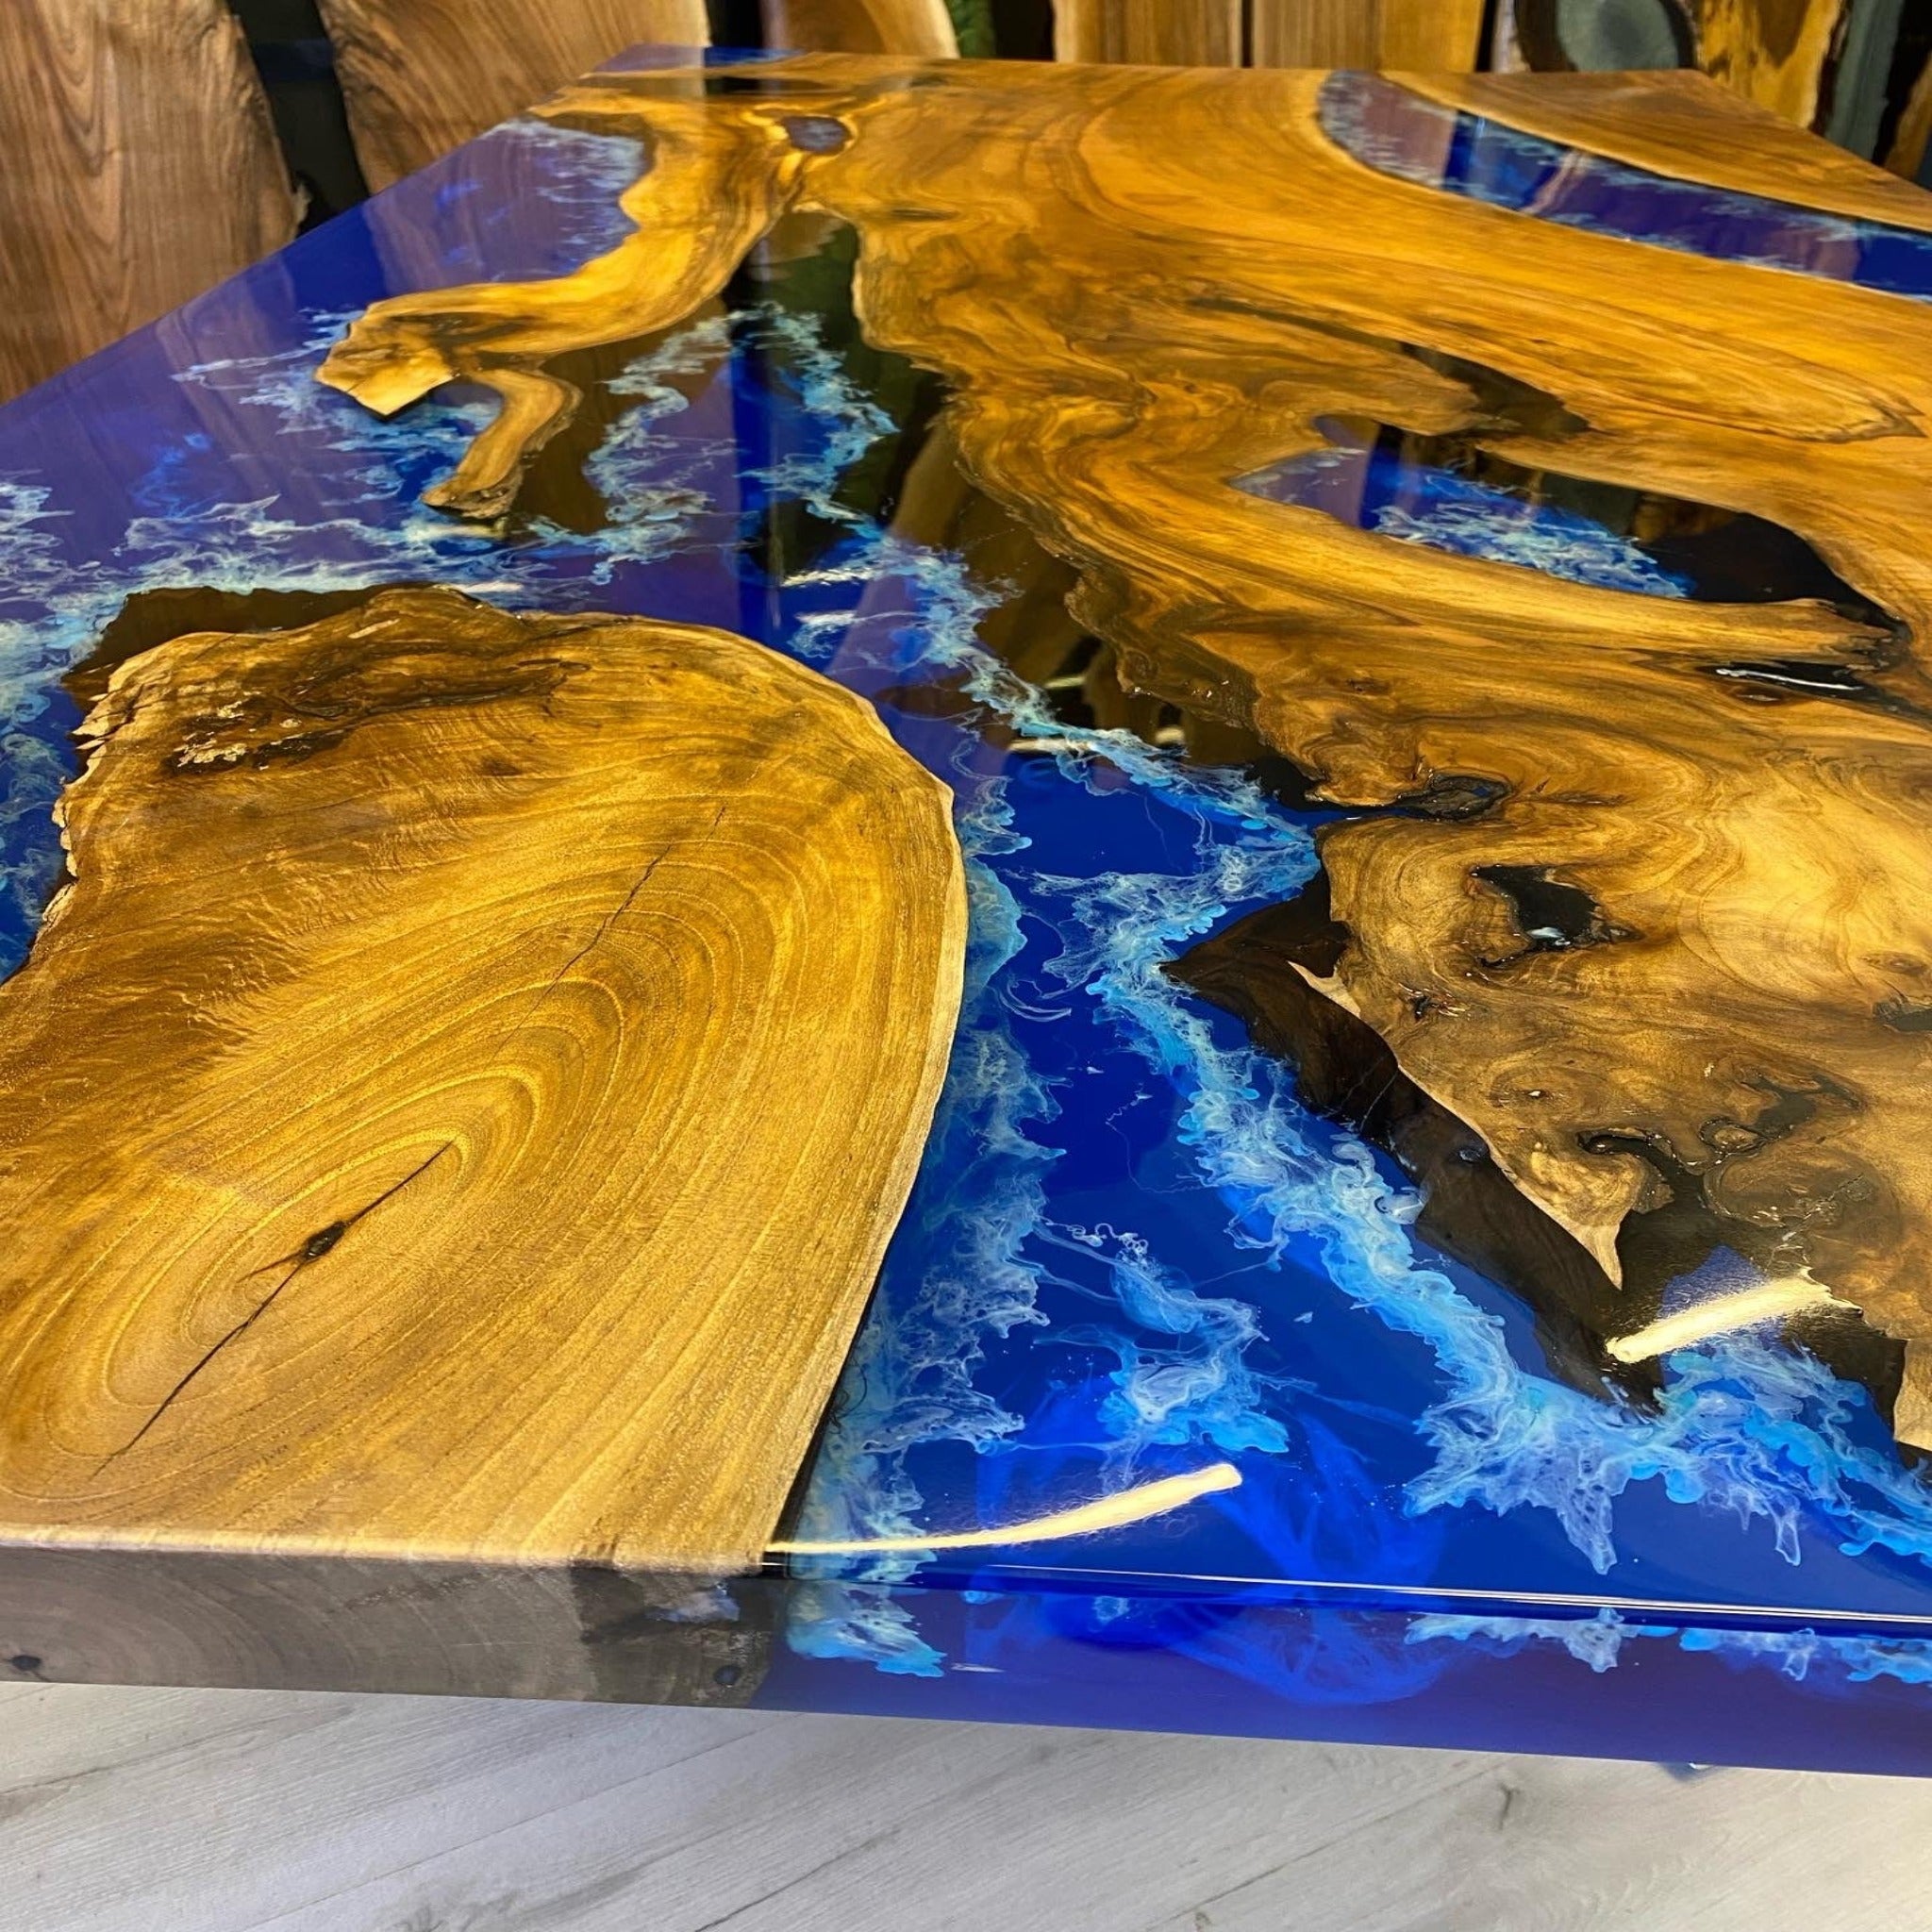 Tables - Custom Epoxy Resin Dining Table Clear Epoxy